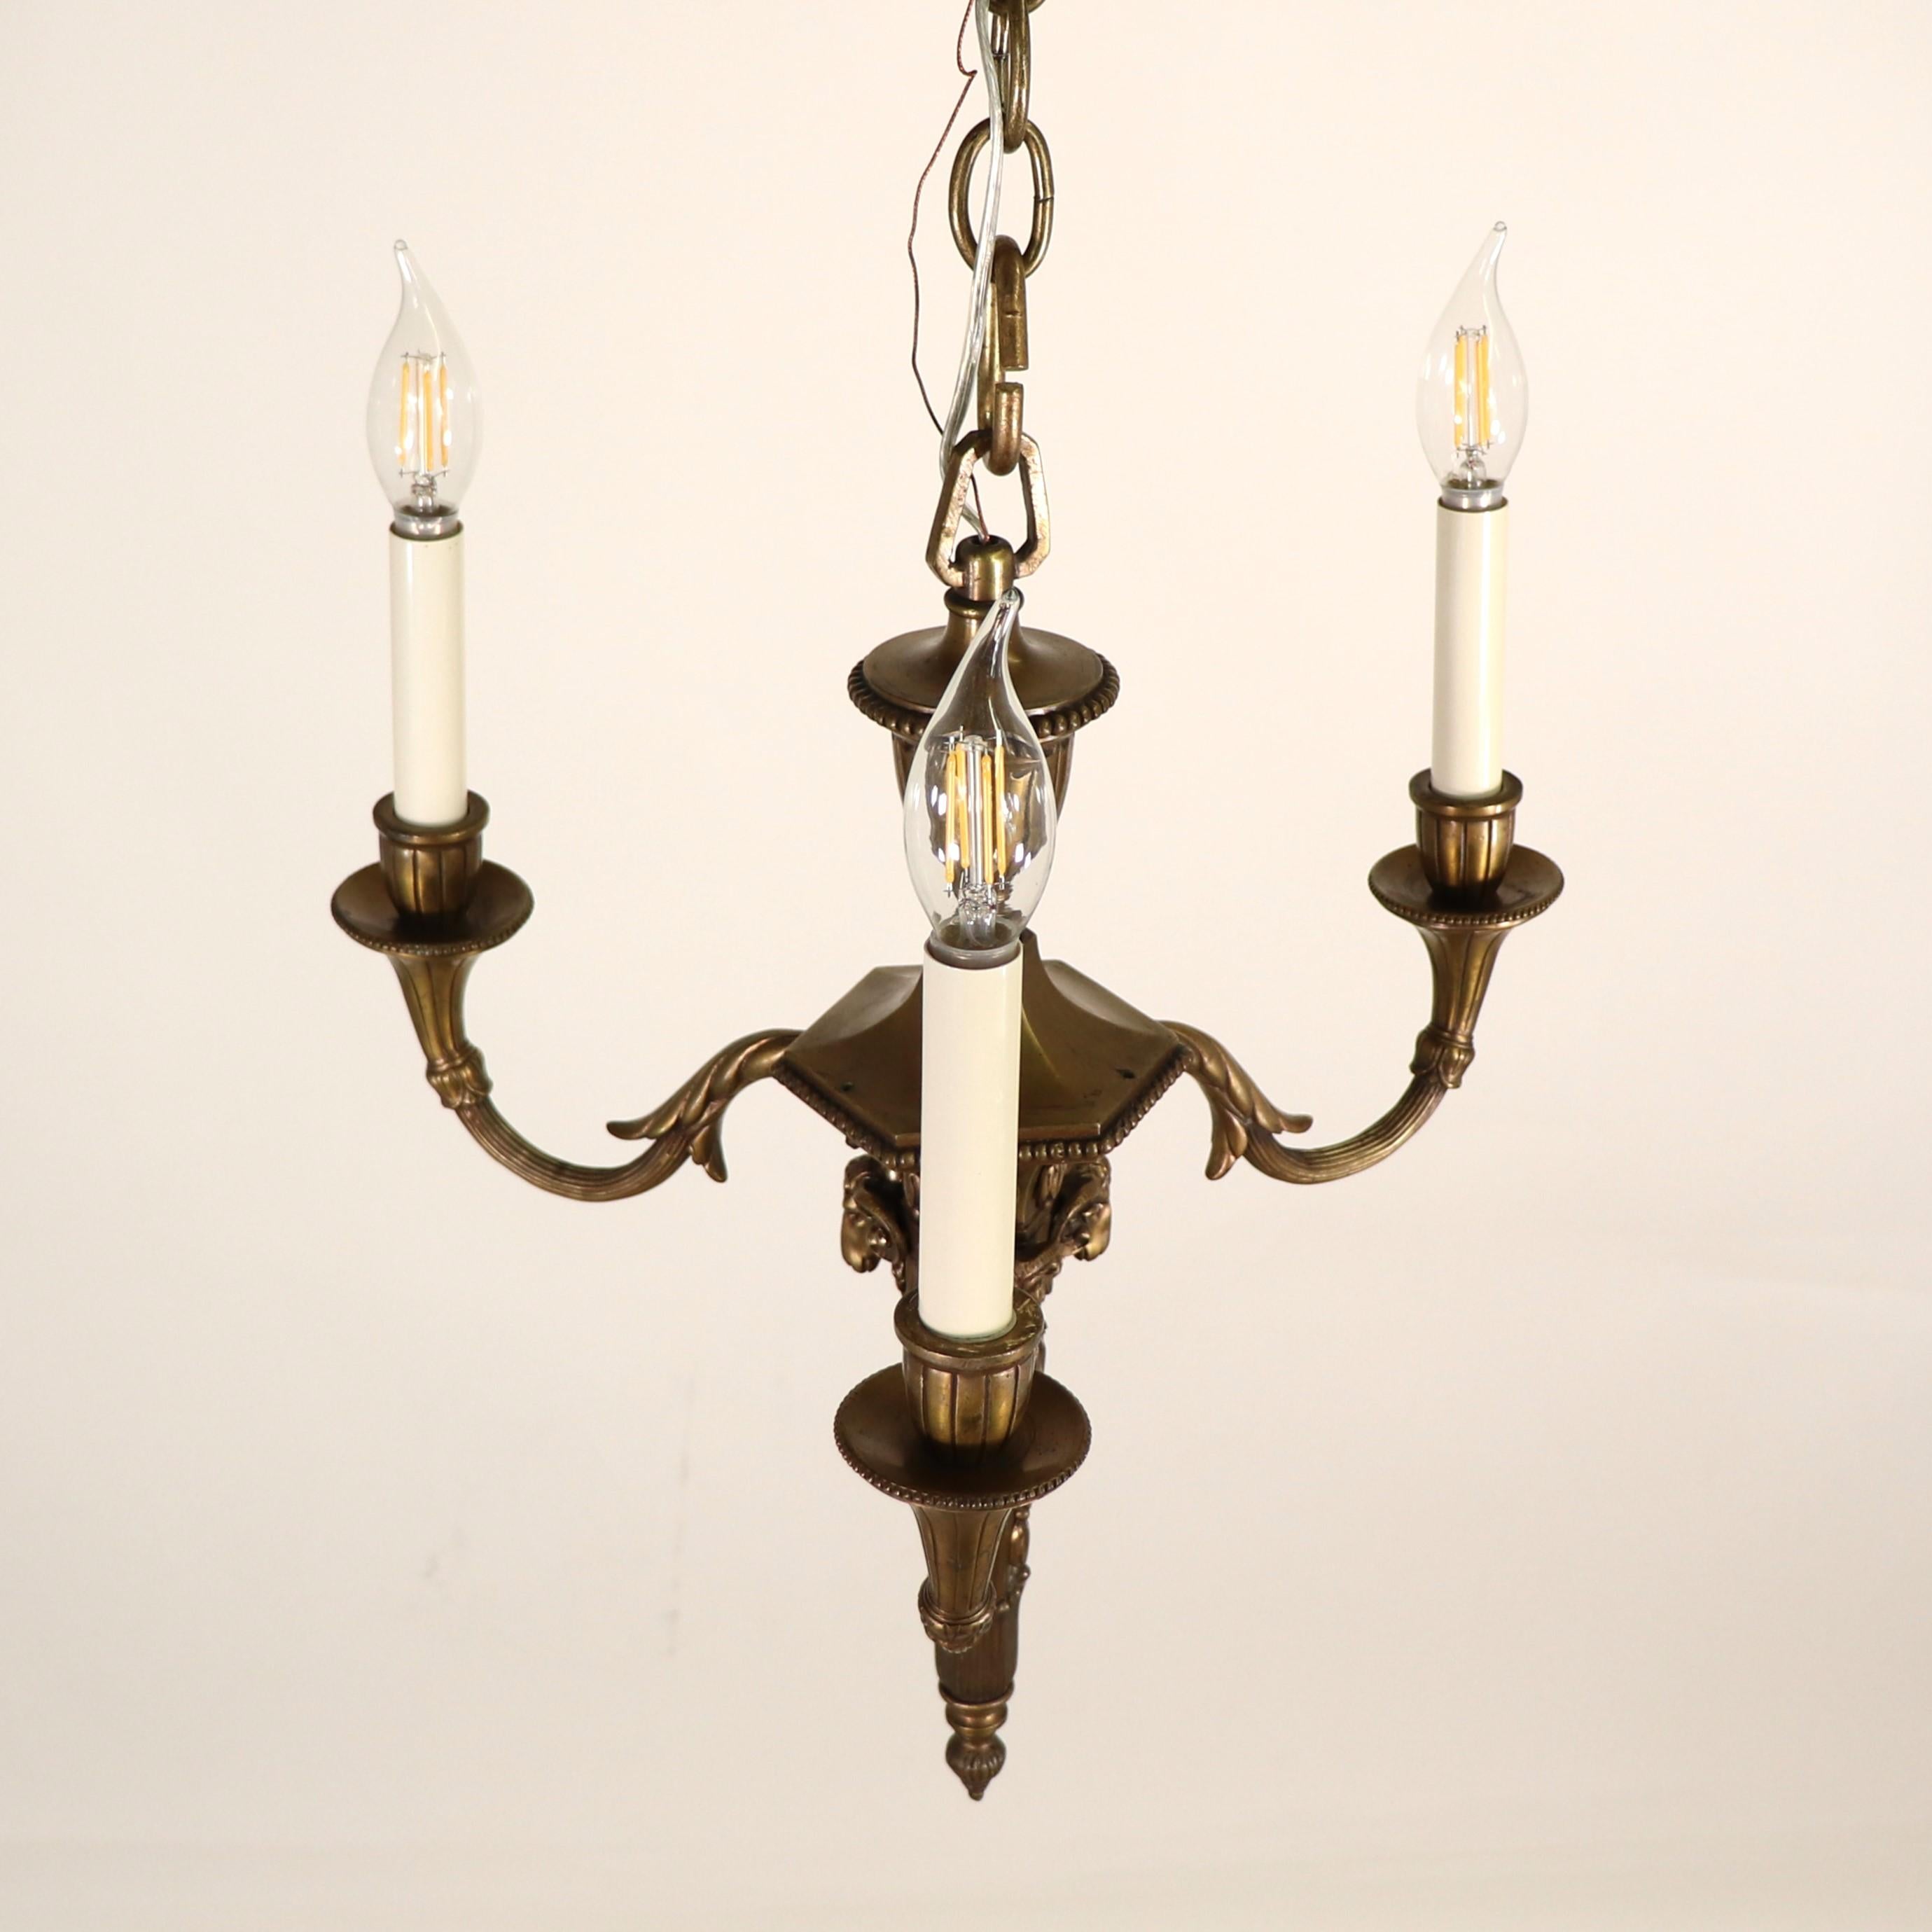 19th Century French Louis XVI Style Neoclassical Bronze Flambeau Chandelier For Sale 2